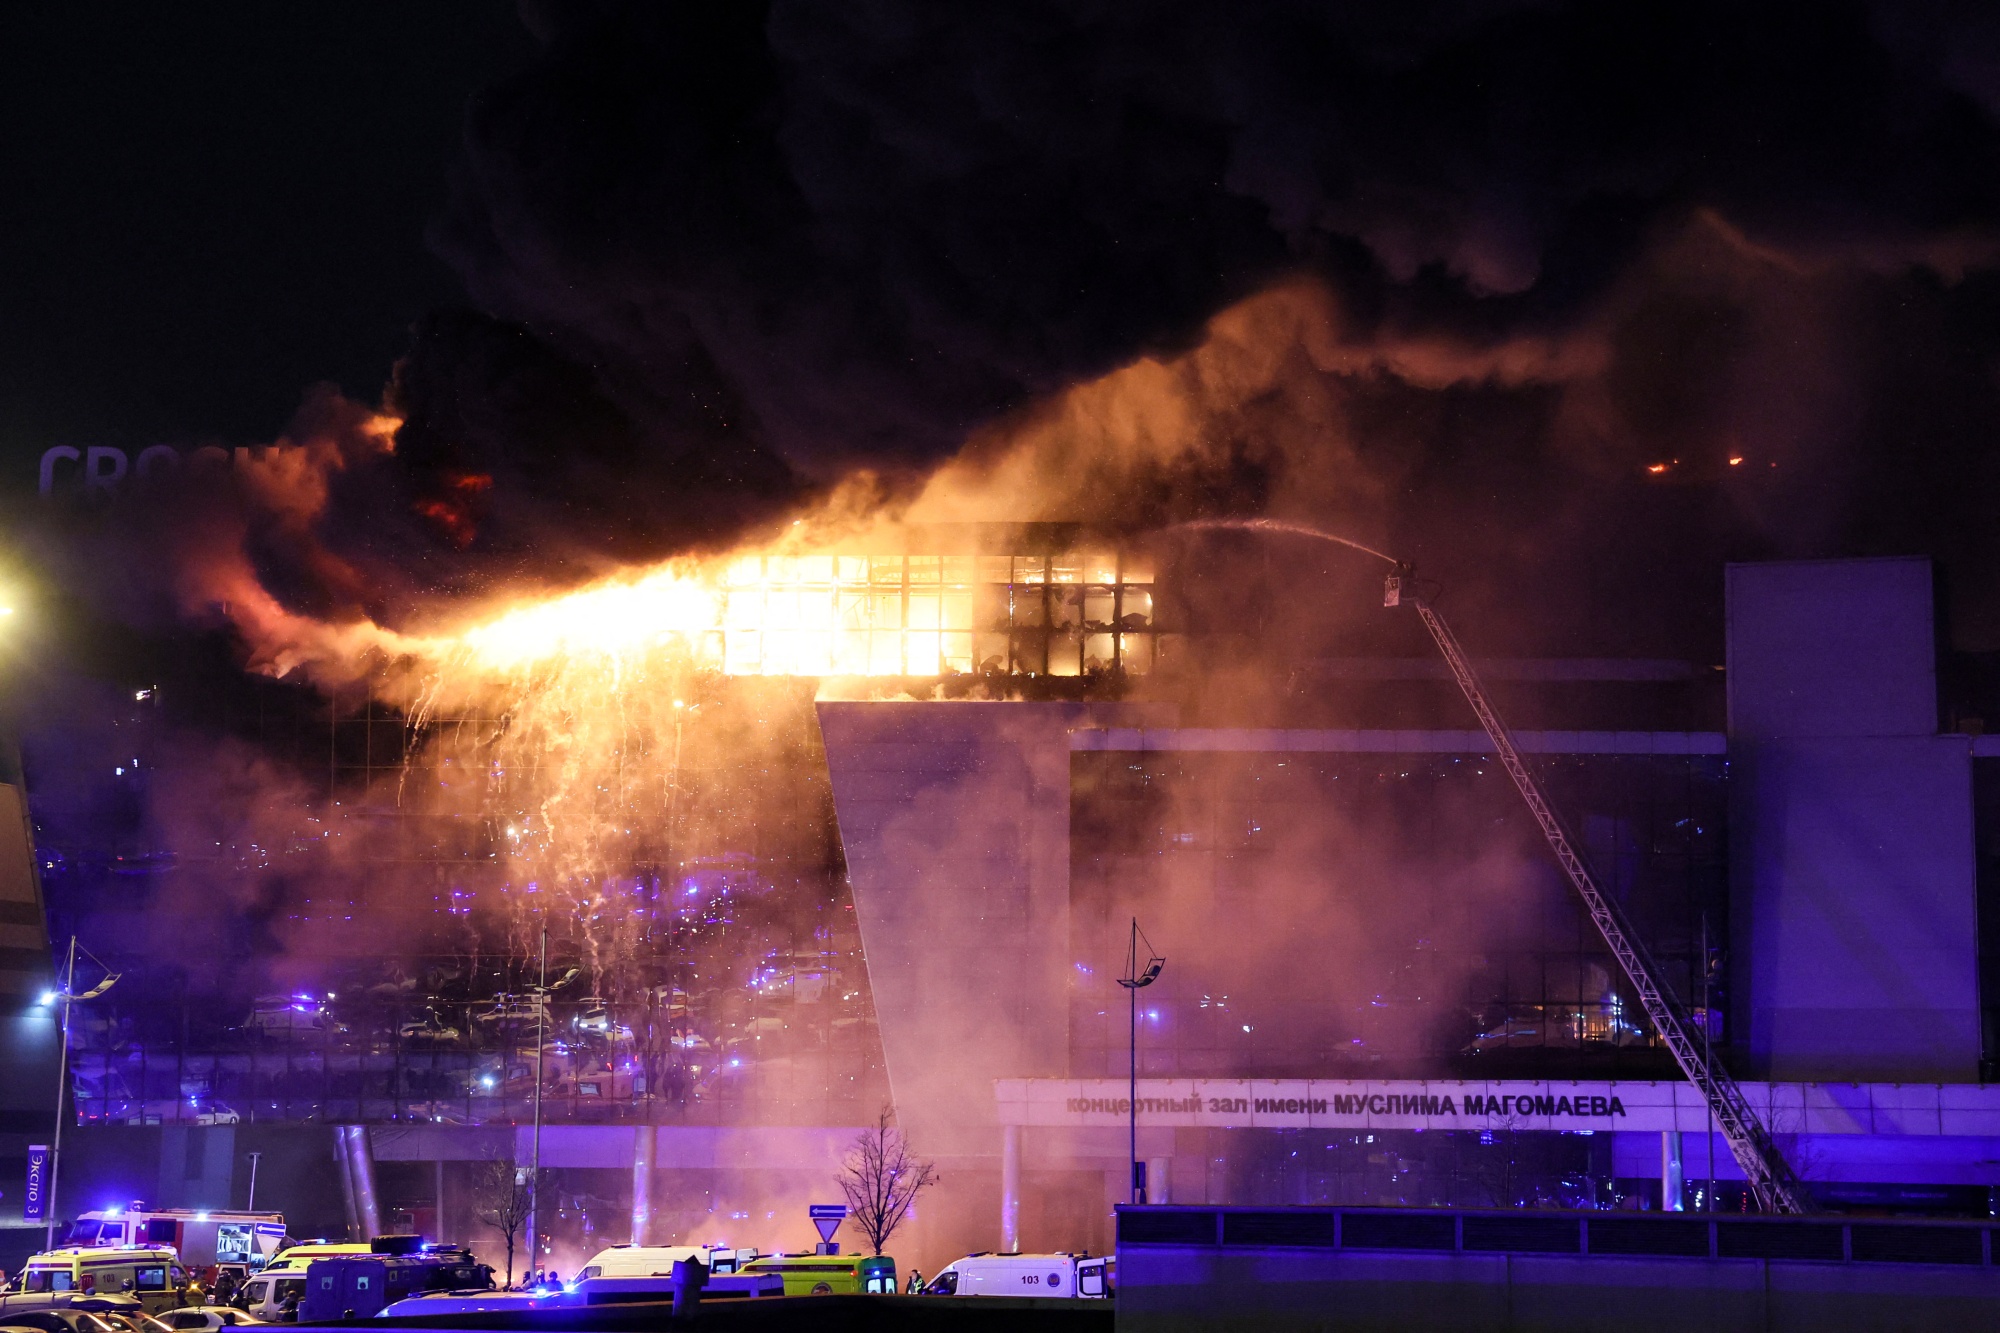 Emergency services tackle a blaze at Crocus City Hall in Moscow on March 22.